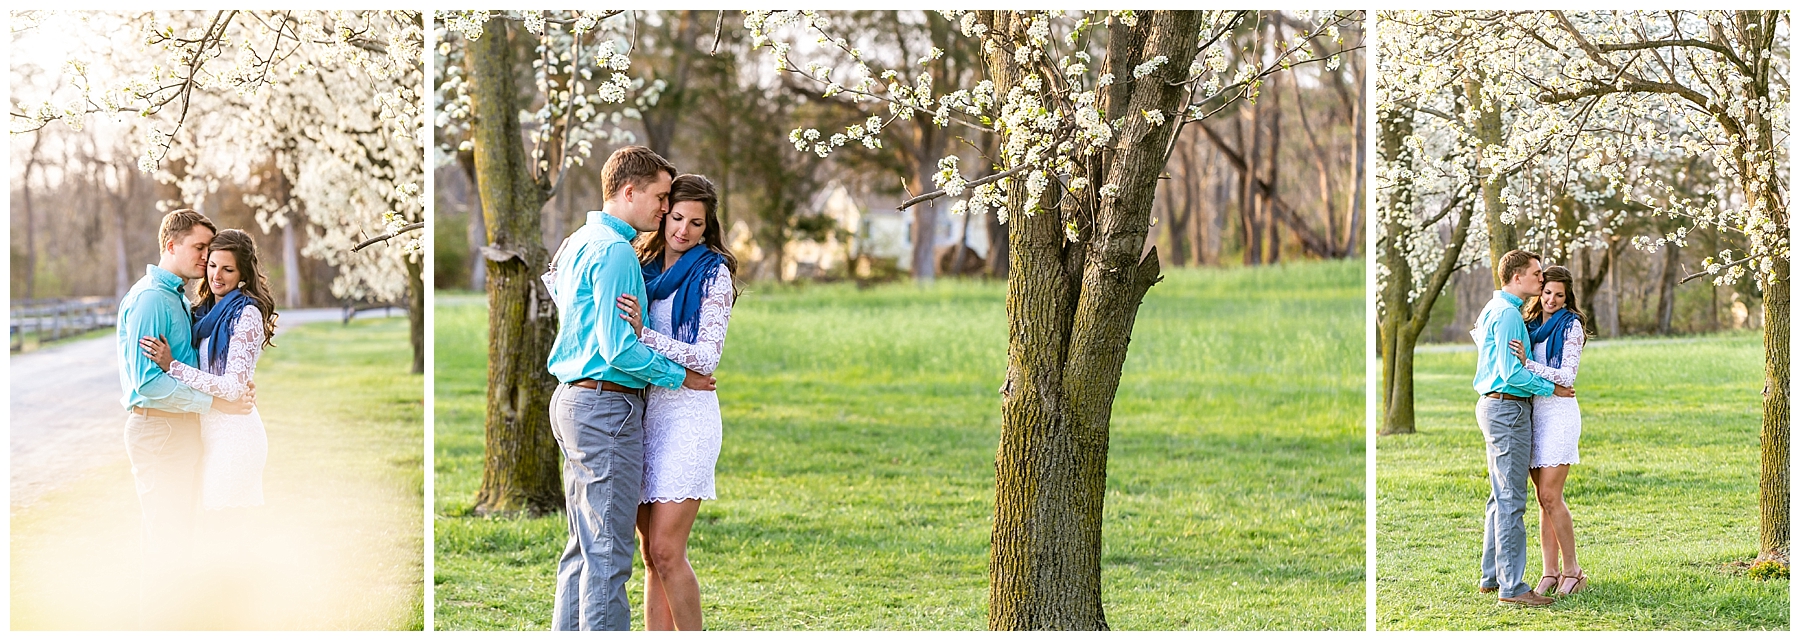 Chelsea Phil Private Estate Engagement Living Radiant Photography photos color_0024.jpg